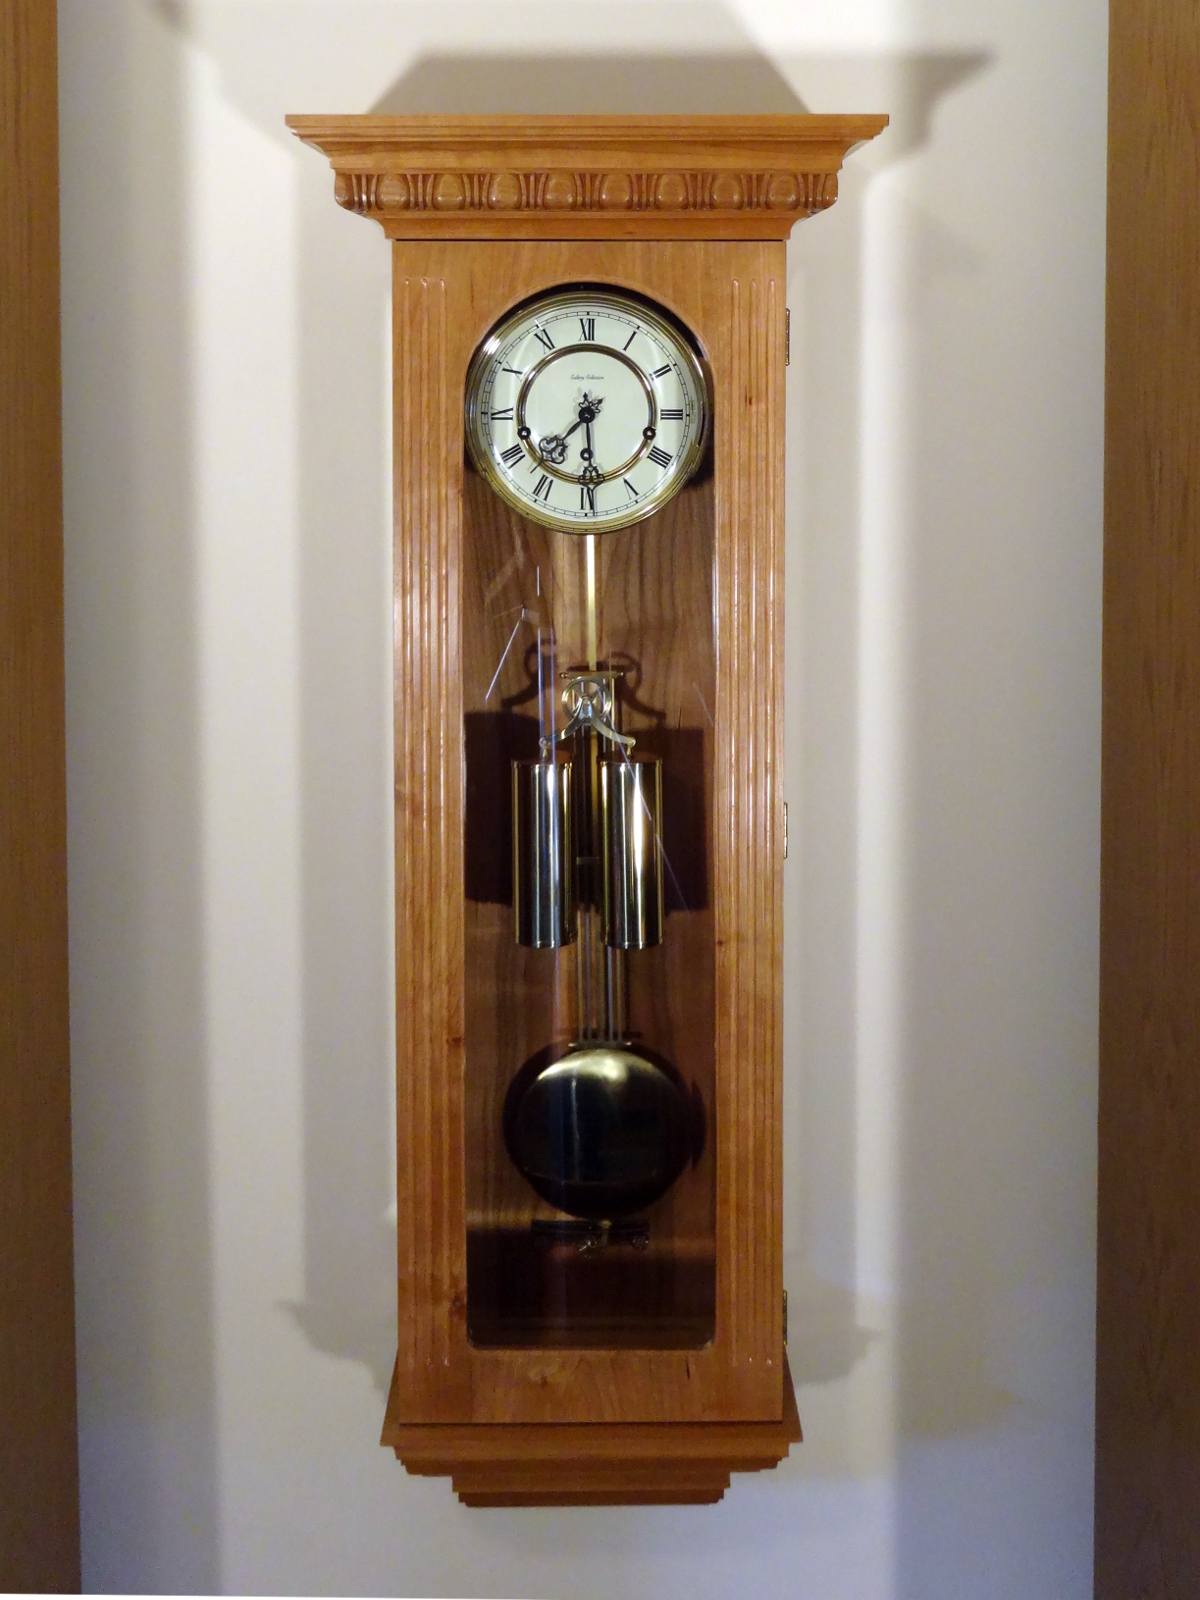 photo of the regulator clock from front